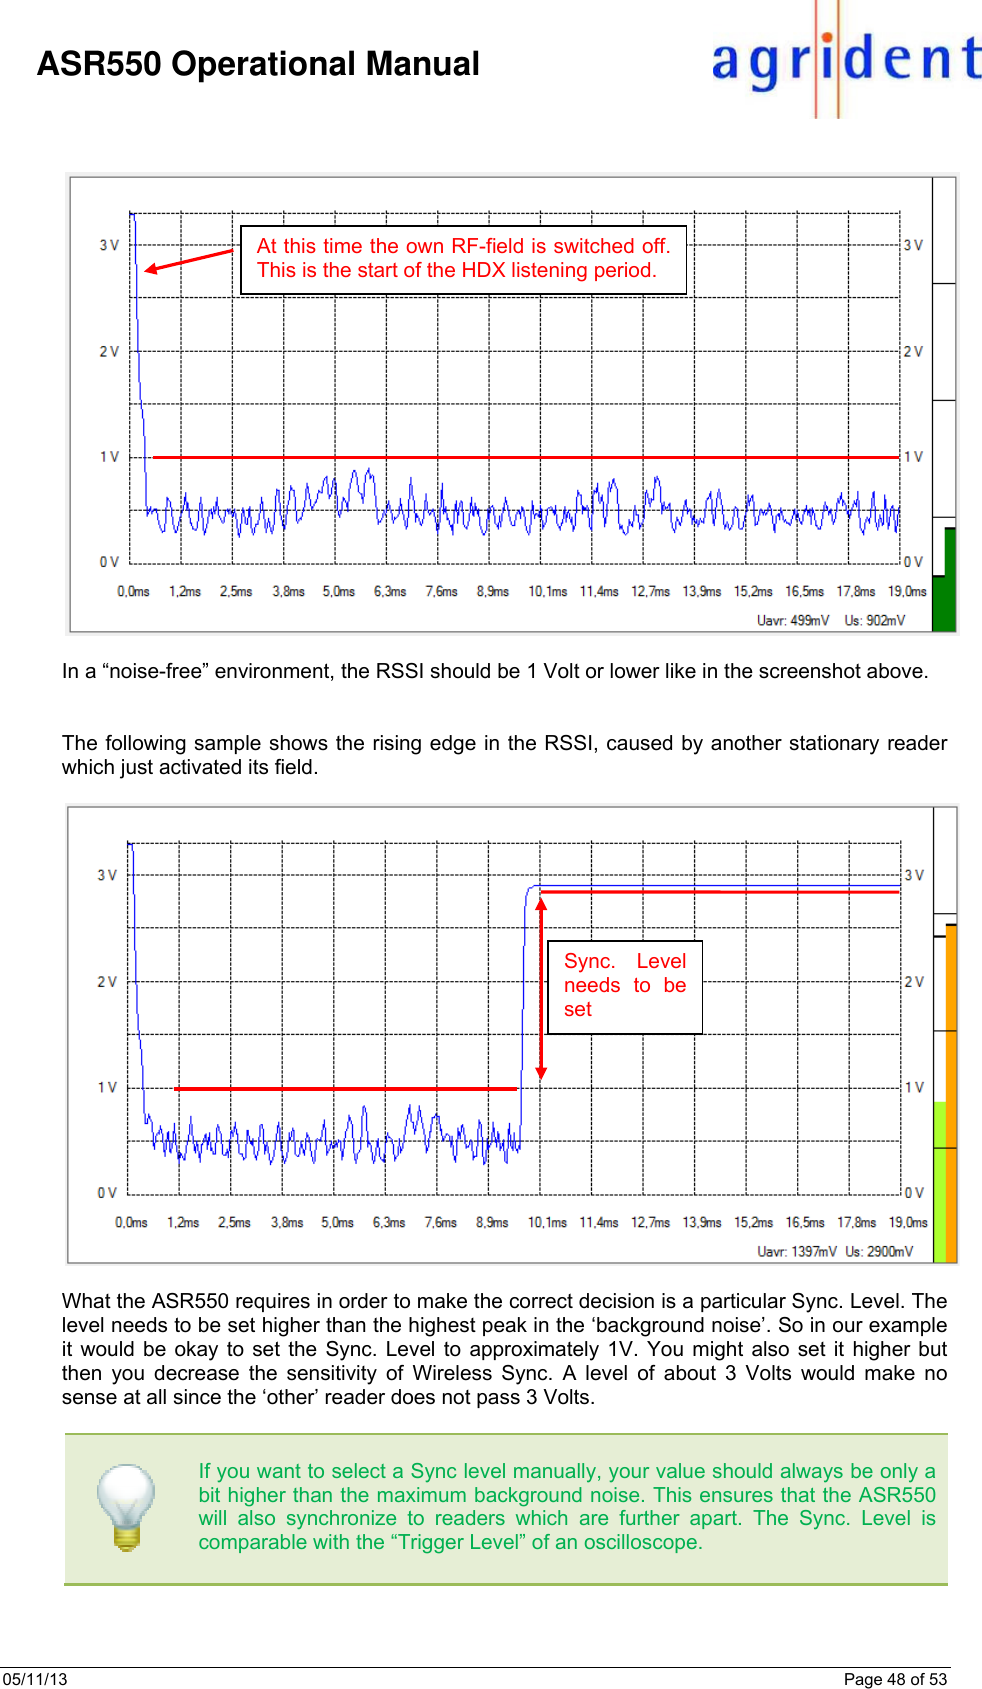 05/11/13    Page 48 of 53     ASR550 Operational Manual     In a “noise-free” environment, the RSSI should be 1 Volt or lower like in the screenshot above.    The following sample shows the rising edge in the RSSI, caused by another stationary reader which just activated its field.    What the ASR550 requires in order to make the correct decision is a particular Sync. Level. The level needs to be set higher than the highest peak in the ‘background noise’. So in our example it would be okay to set the Sync. Level to approximately 1V. You might also set it higher but then you decrease the sensitivity of Wireless Sync. A level of about 3 Volts would make no sense at all since the ‘other’ reader does not pass 3 Volts.      If you want to select a Sync level manually, your value should always be only a bit higher than the maximum background noise. This ensures that the ASR550 will also synchronize to readers which are further apart. The Sync. Level is comparable with the “Trigger Level” of an oscilloscope.      At this time the own RF-field is switched off. This is the start of the HDX listening period. Sync. Level needs to be set 